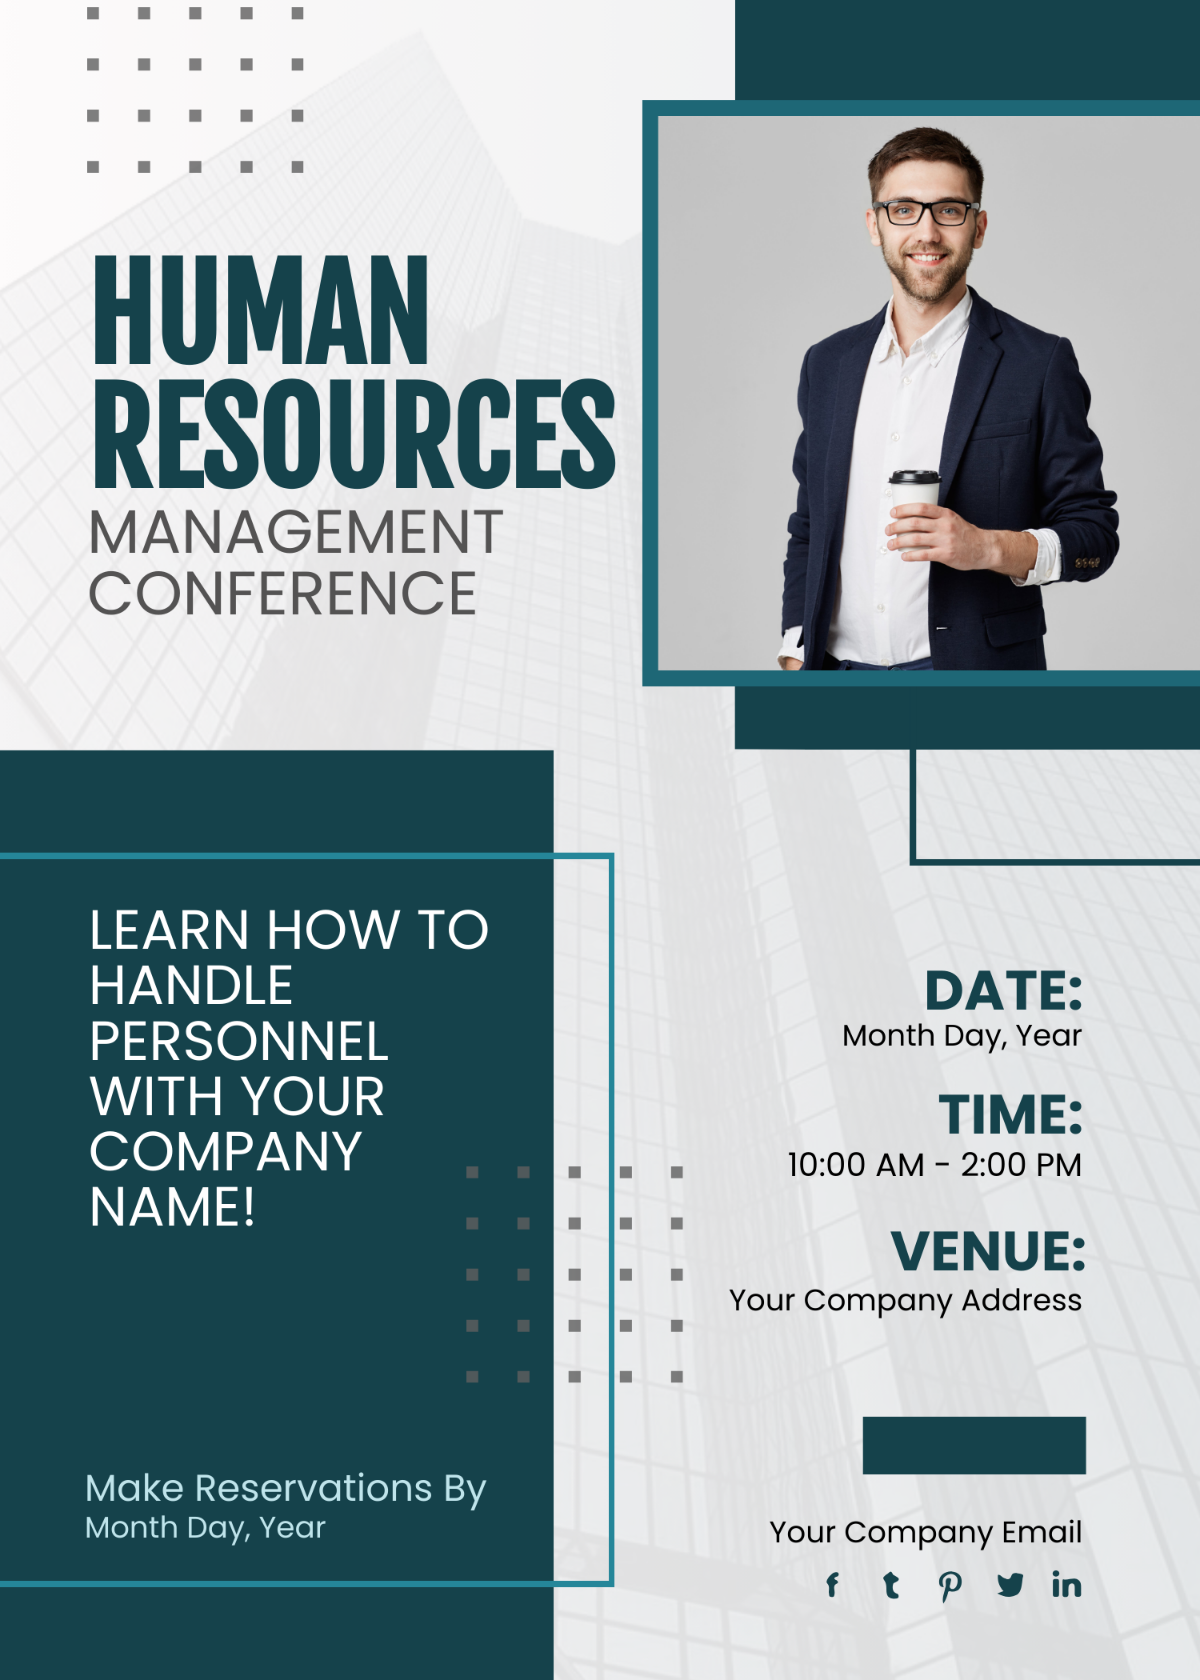 Human Resources Management Conference Invitation Card Template